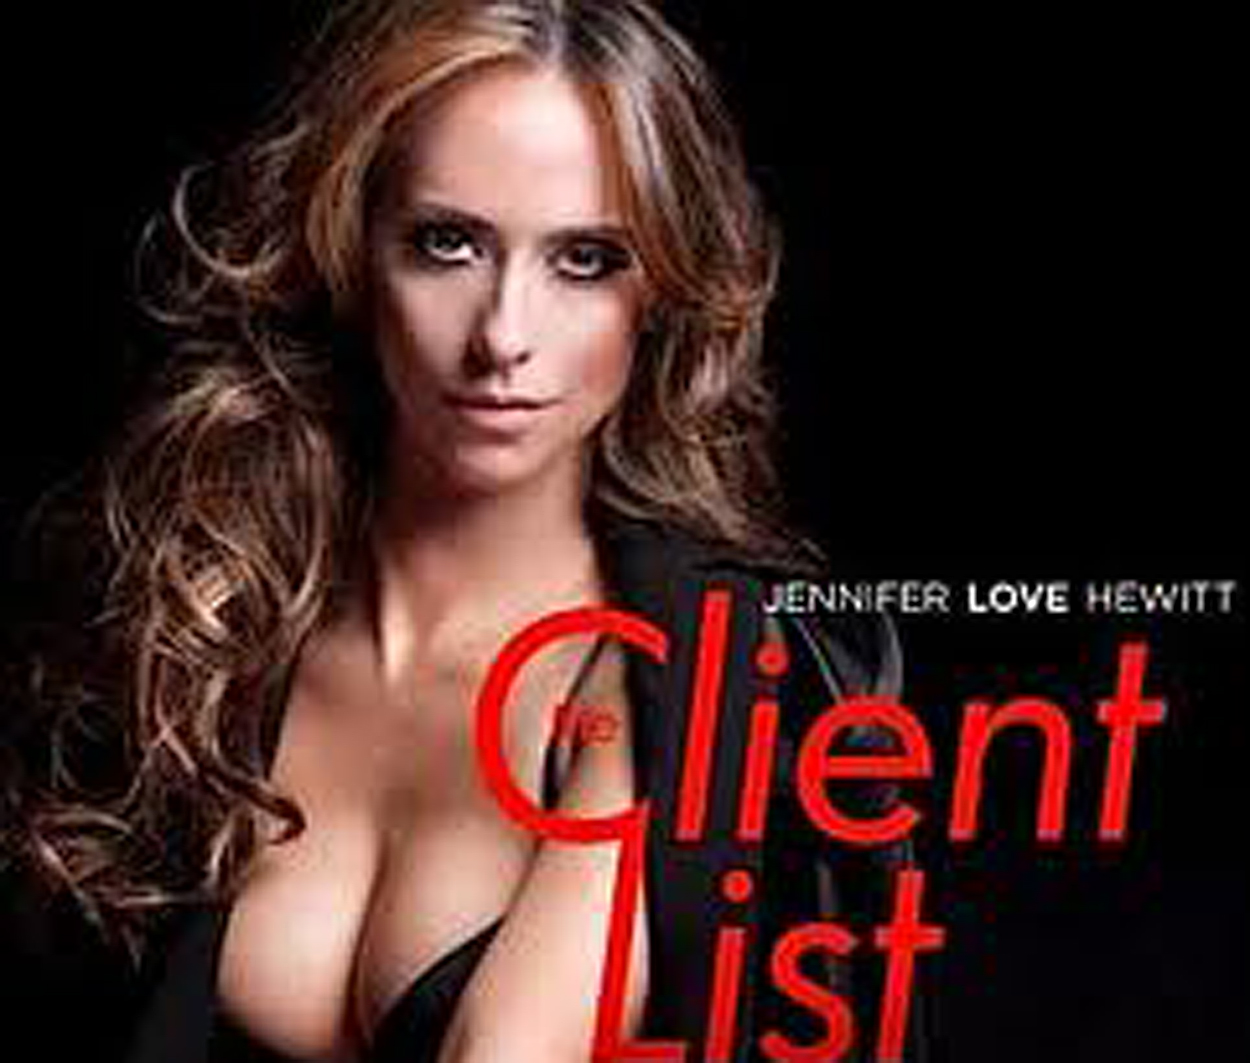 Jennifer Love Hewitt Anal Sex - If It Ever Came To That - The Good Men Project